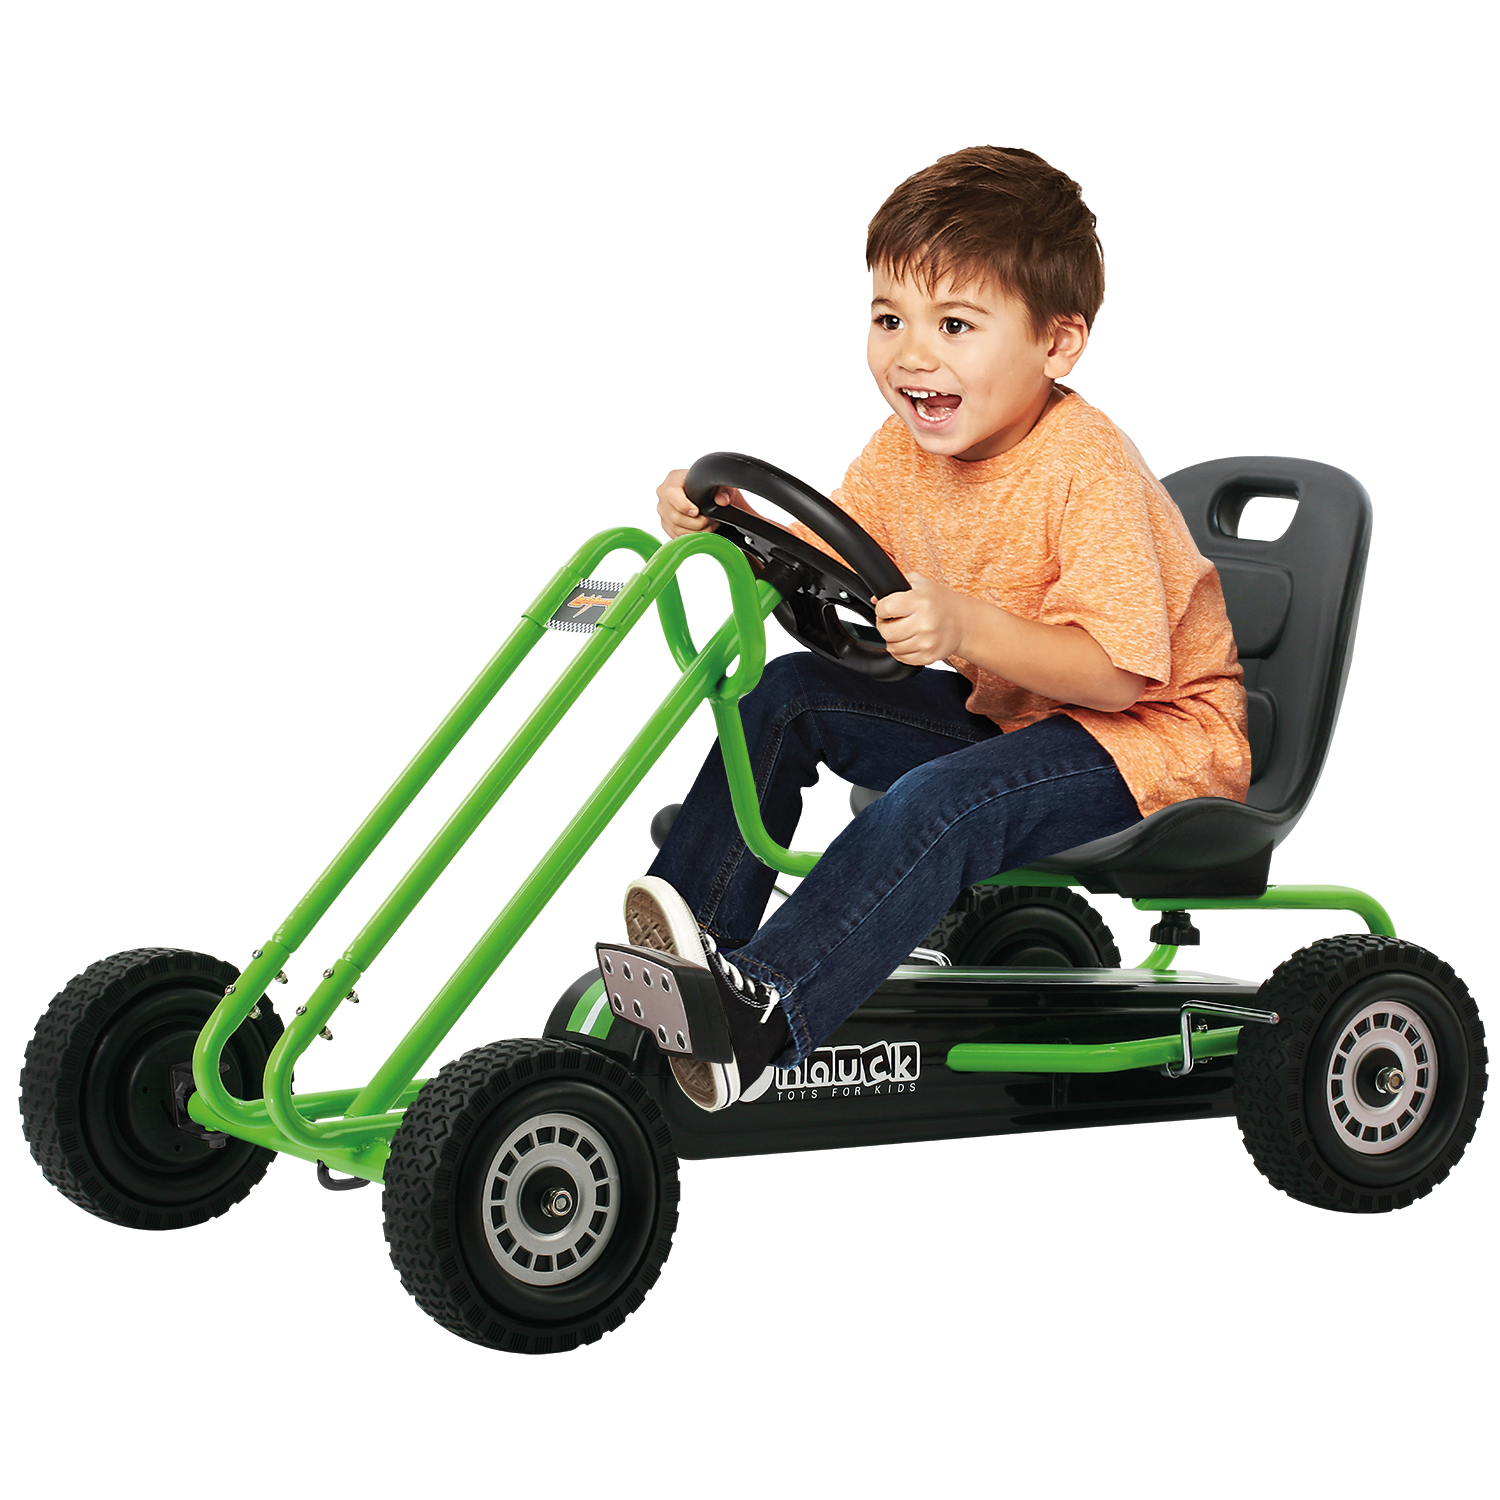 Hauck Lightning Ride-On Pedal Go-Kart Activity Green or Pink - image 2 of 9